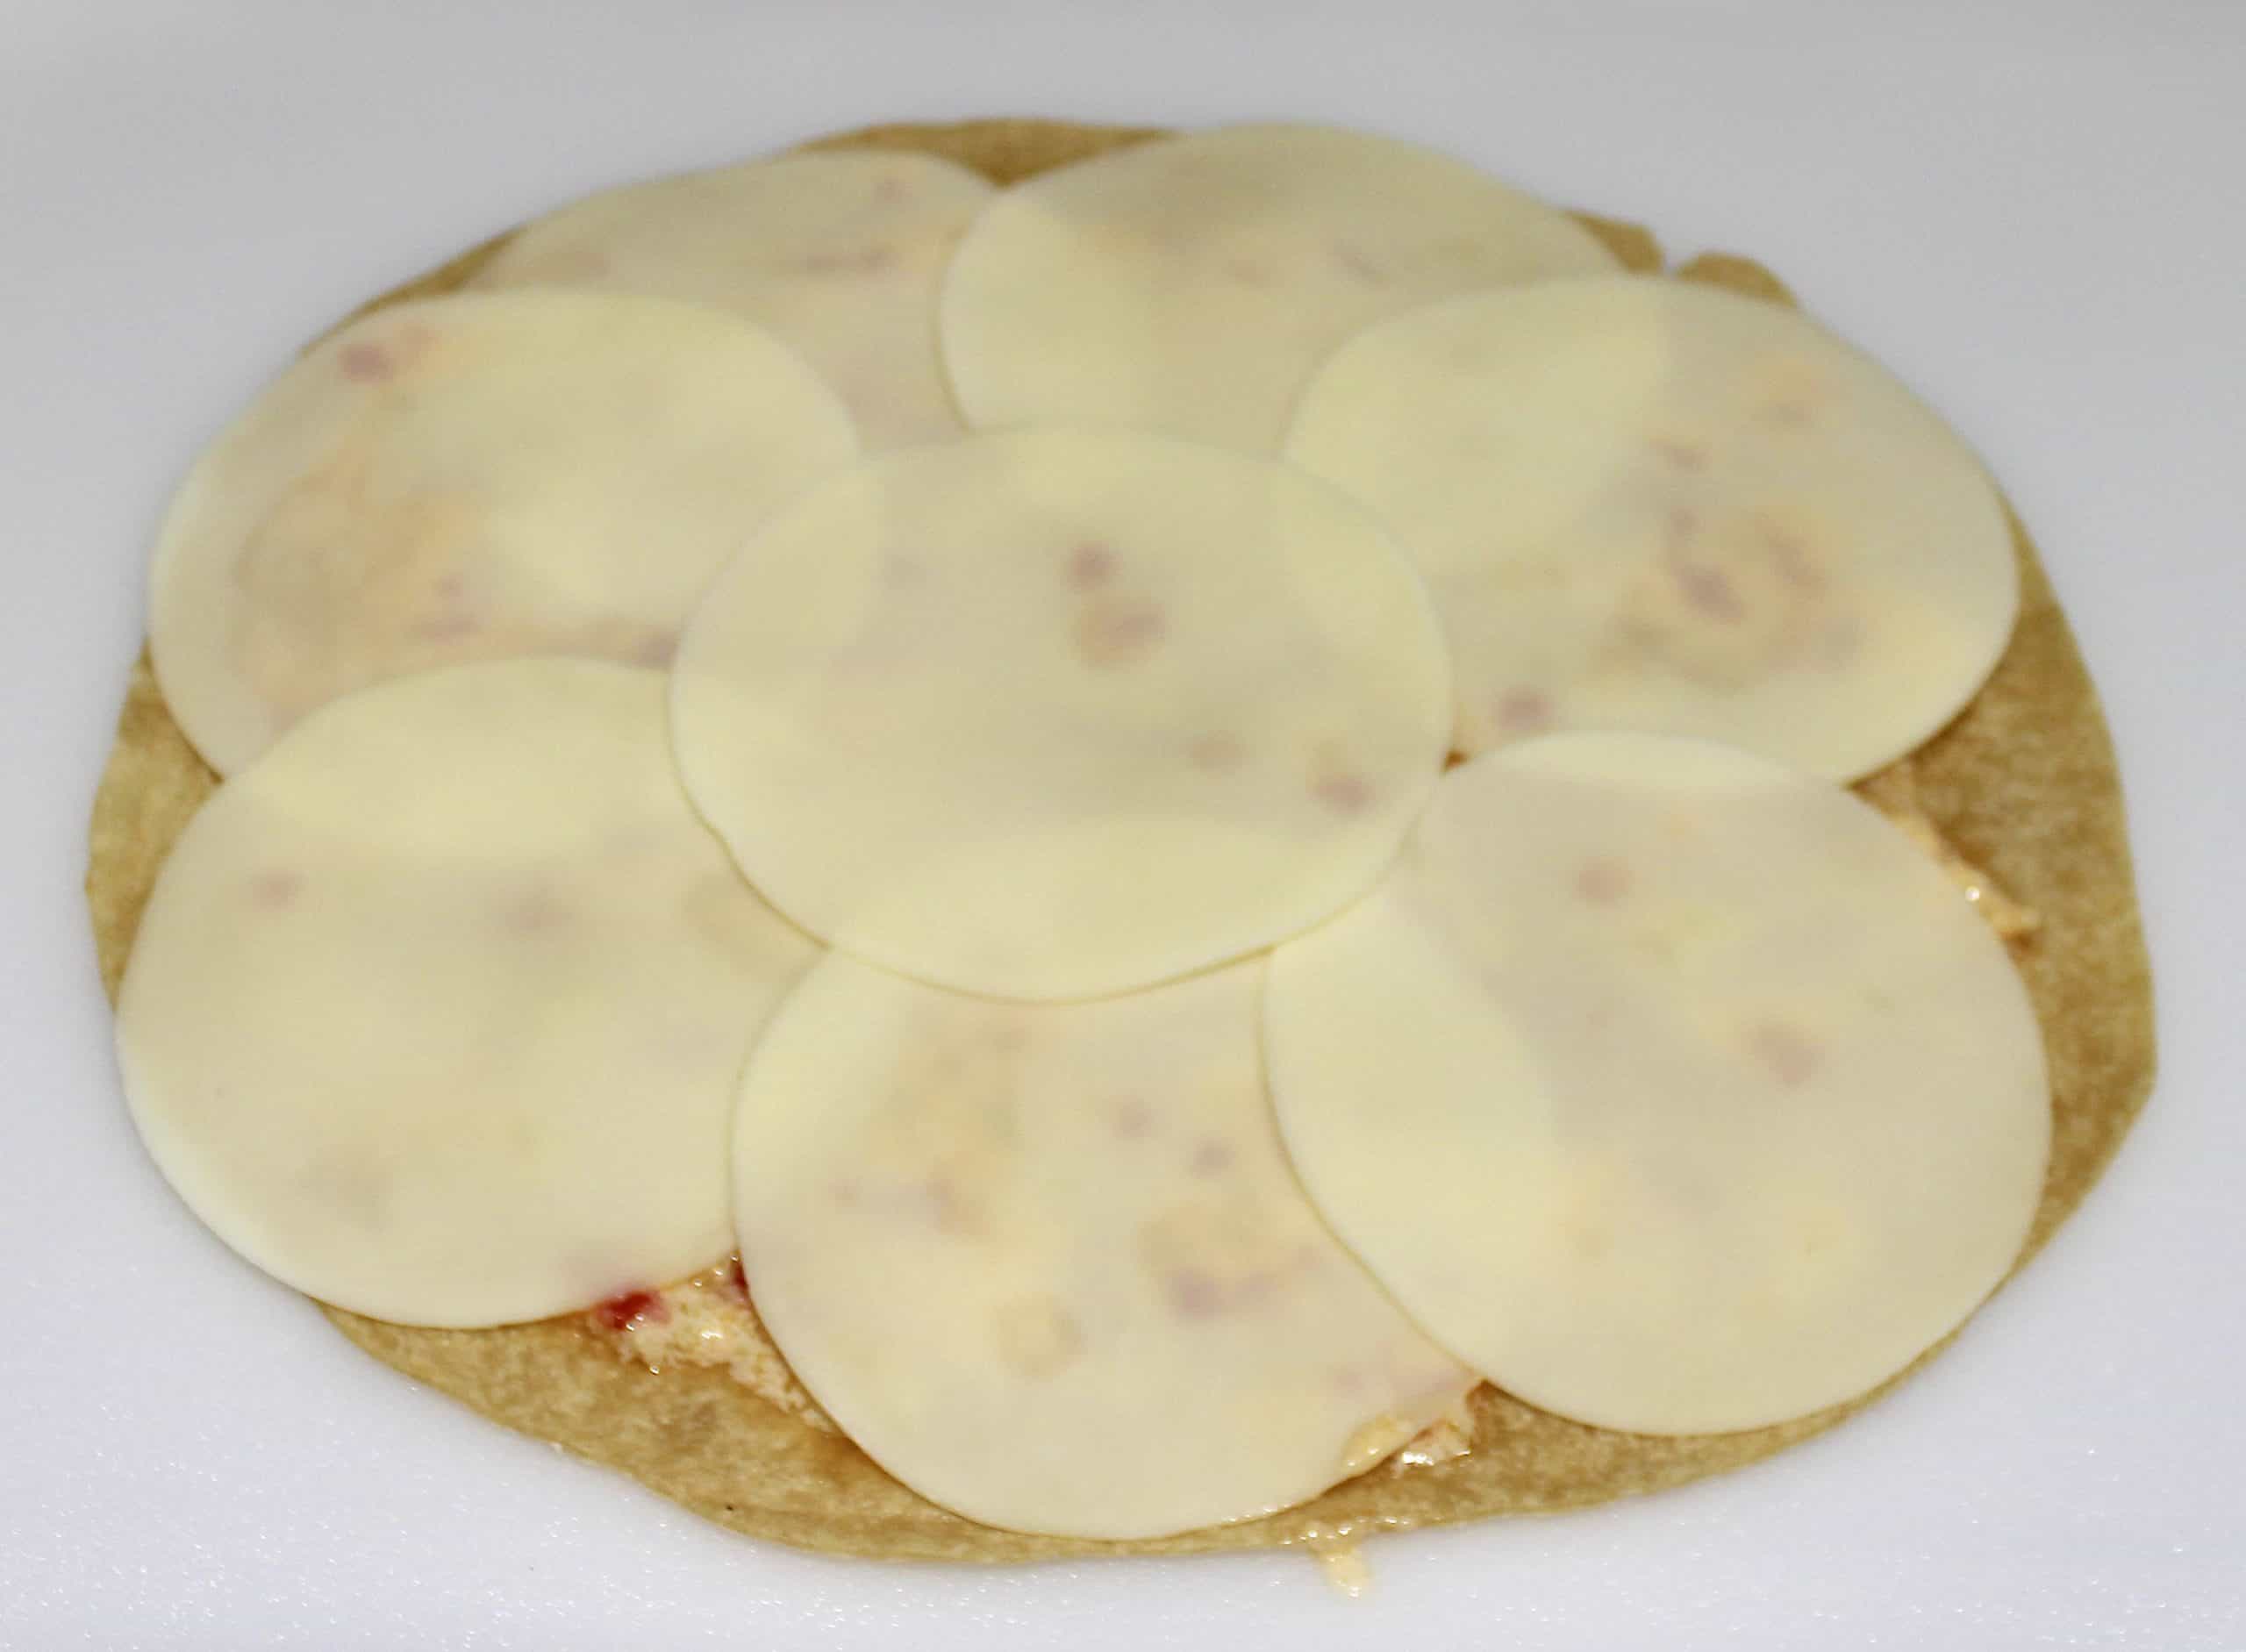 8 slices of provolone cheese on tortilla